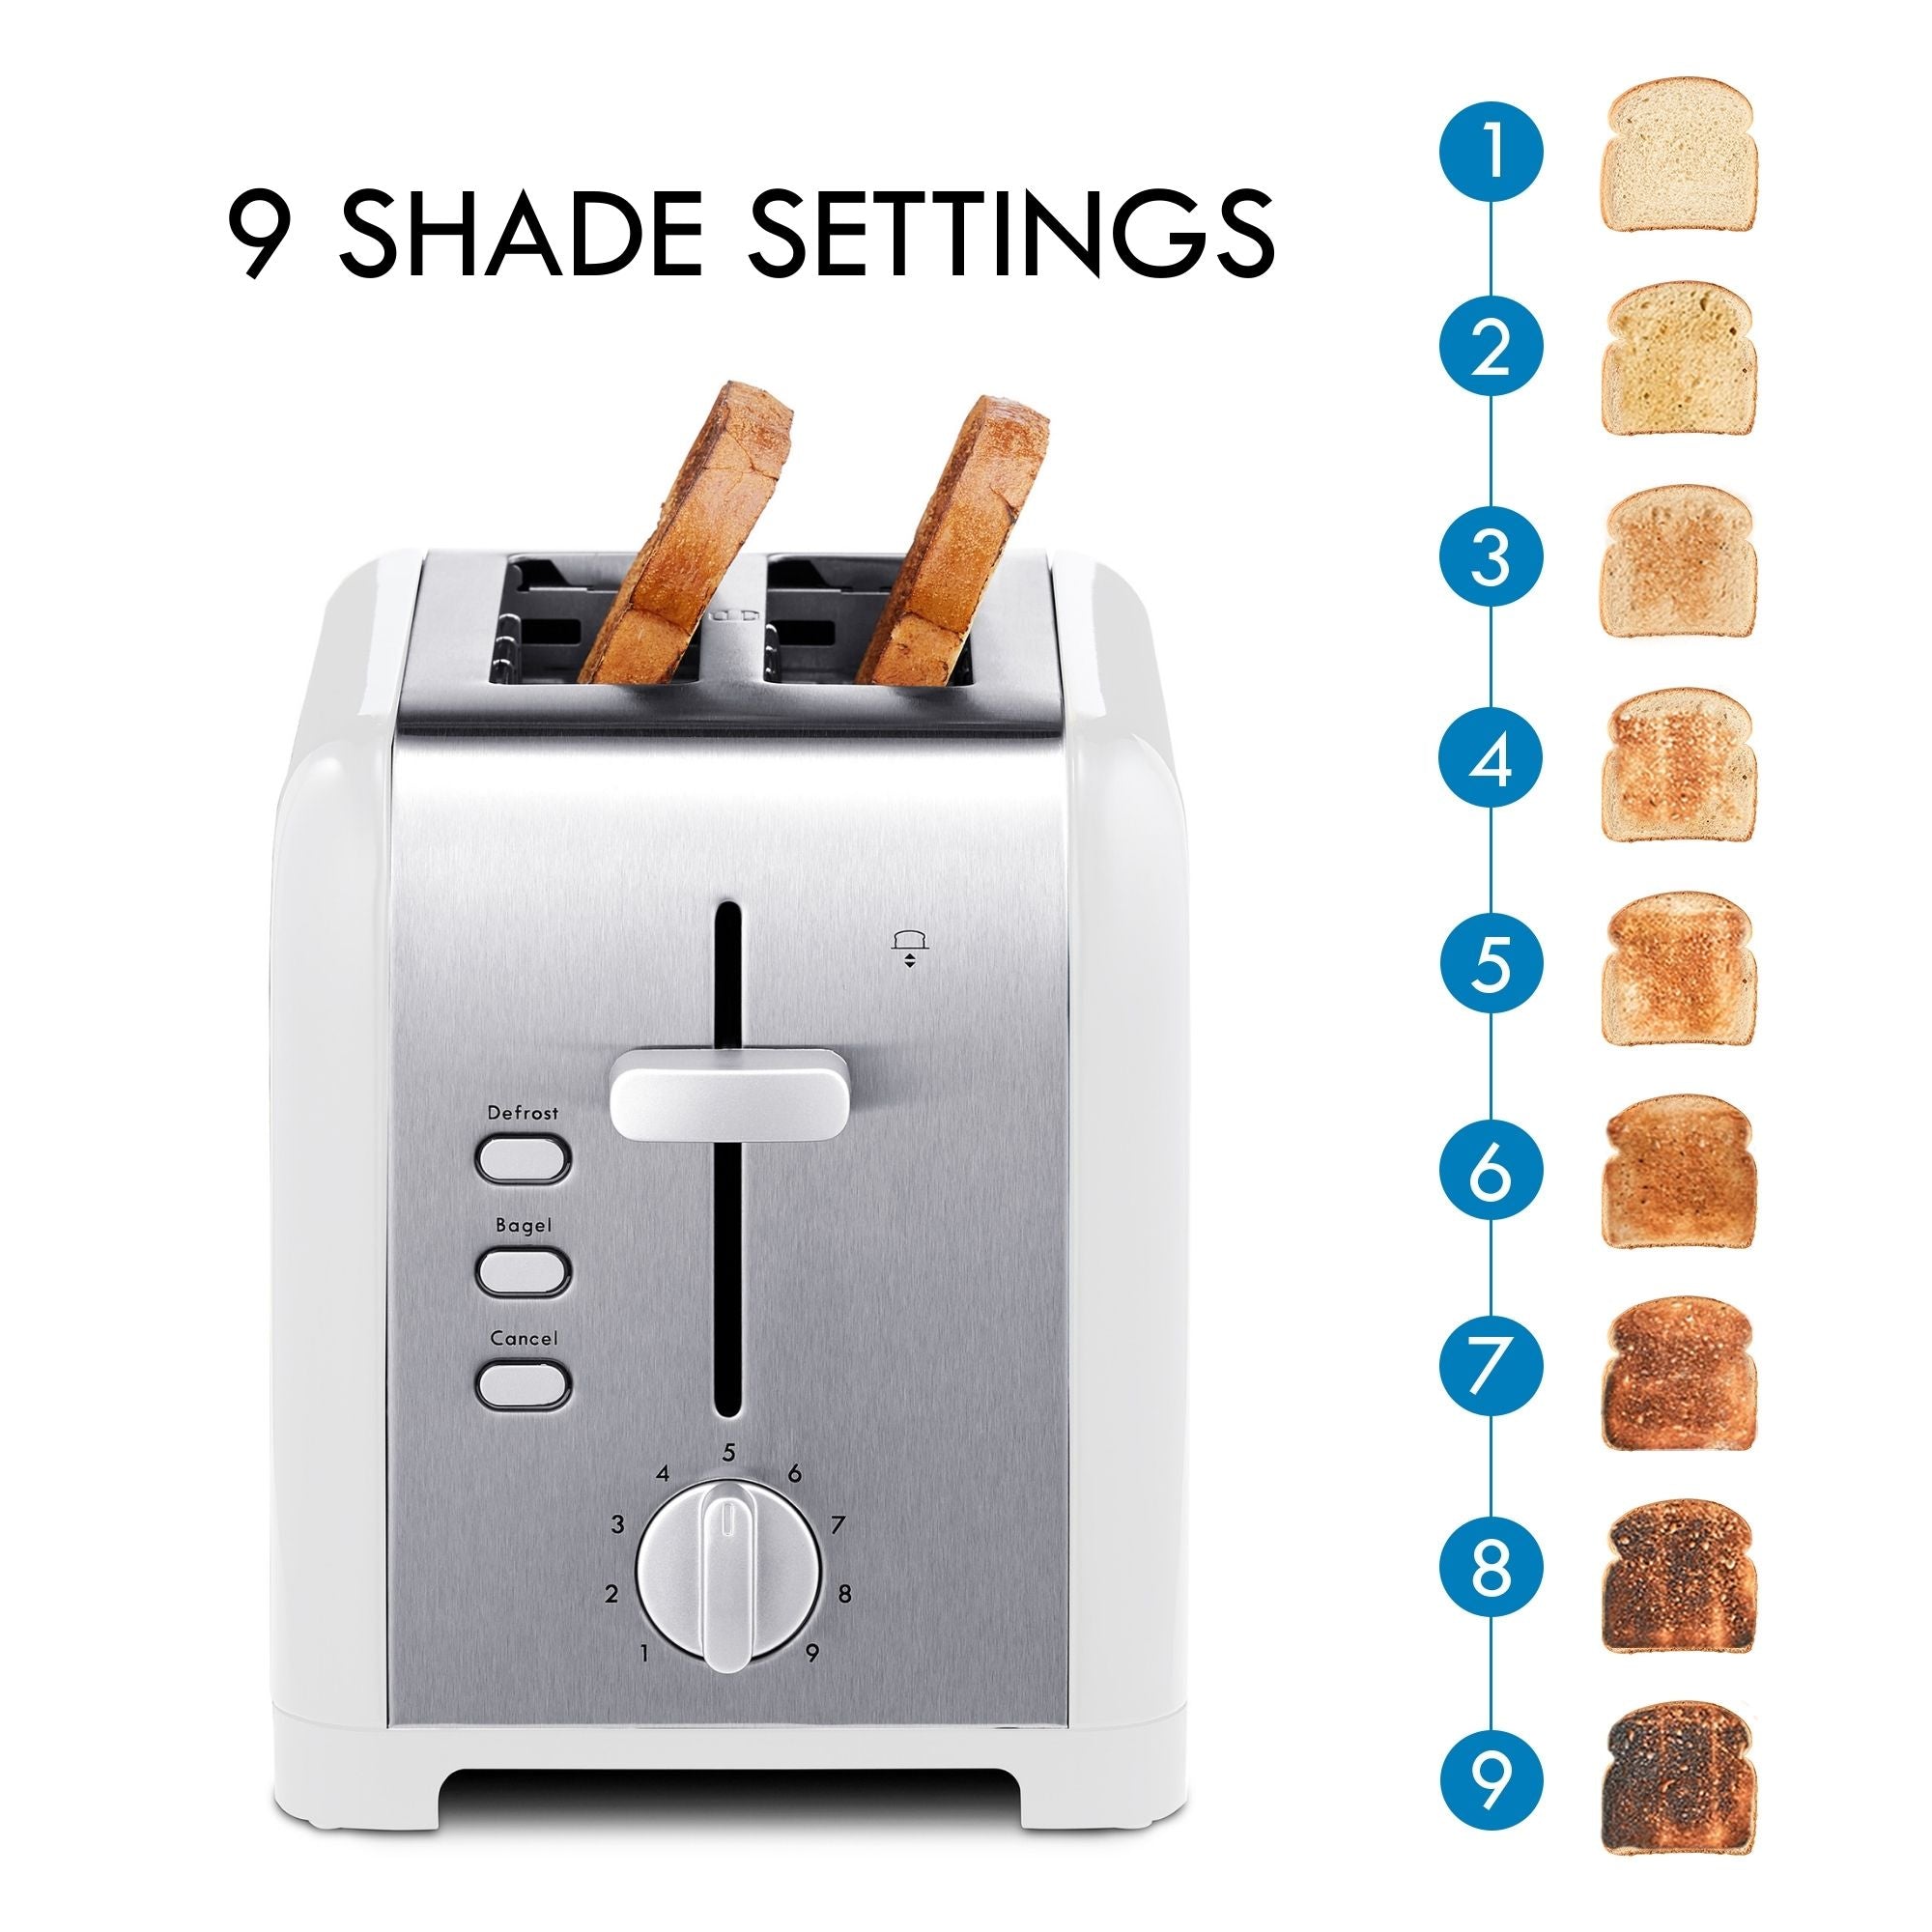 Kenmore 2-slice stainless steel toaster with two pieces of toast on the left with toast slices numbered 1-9 arranged vertically from lightest to darkest on the right. Text above reads, "9 shade settings"Kenmore 2-slice stainless steel toaster with parts labeled: Self-adjusting bread guides; defrost button; bagel button; cancel button. Above are small pictures of a loaf of bread, a stack of bagels, and a stack of waffles, labeled